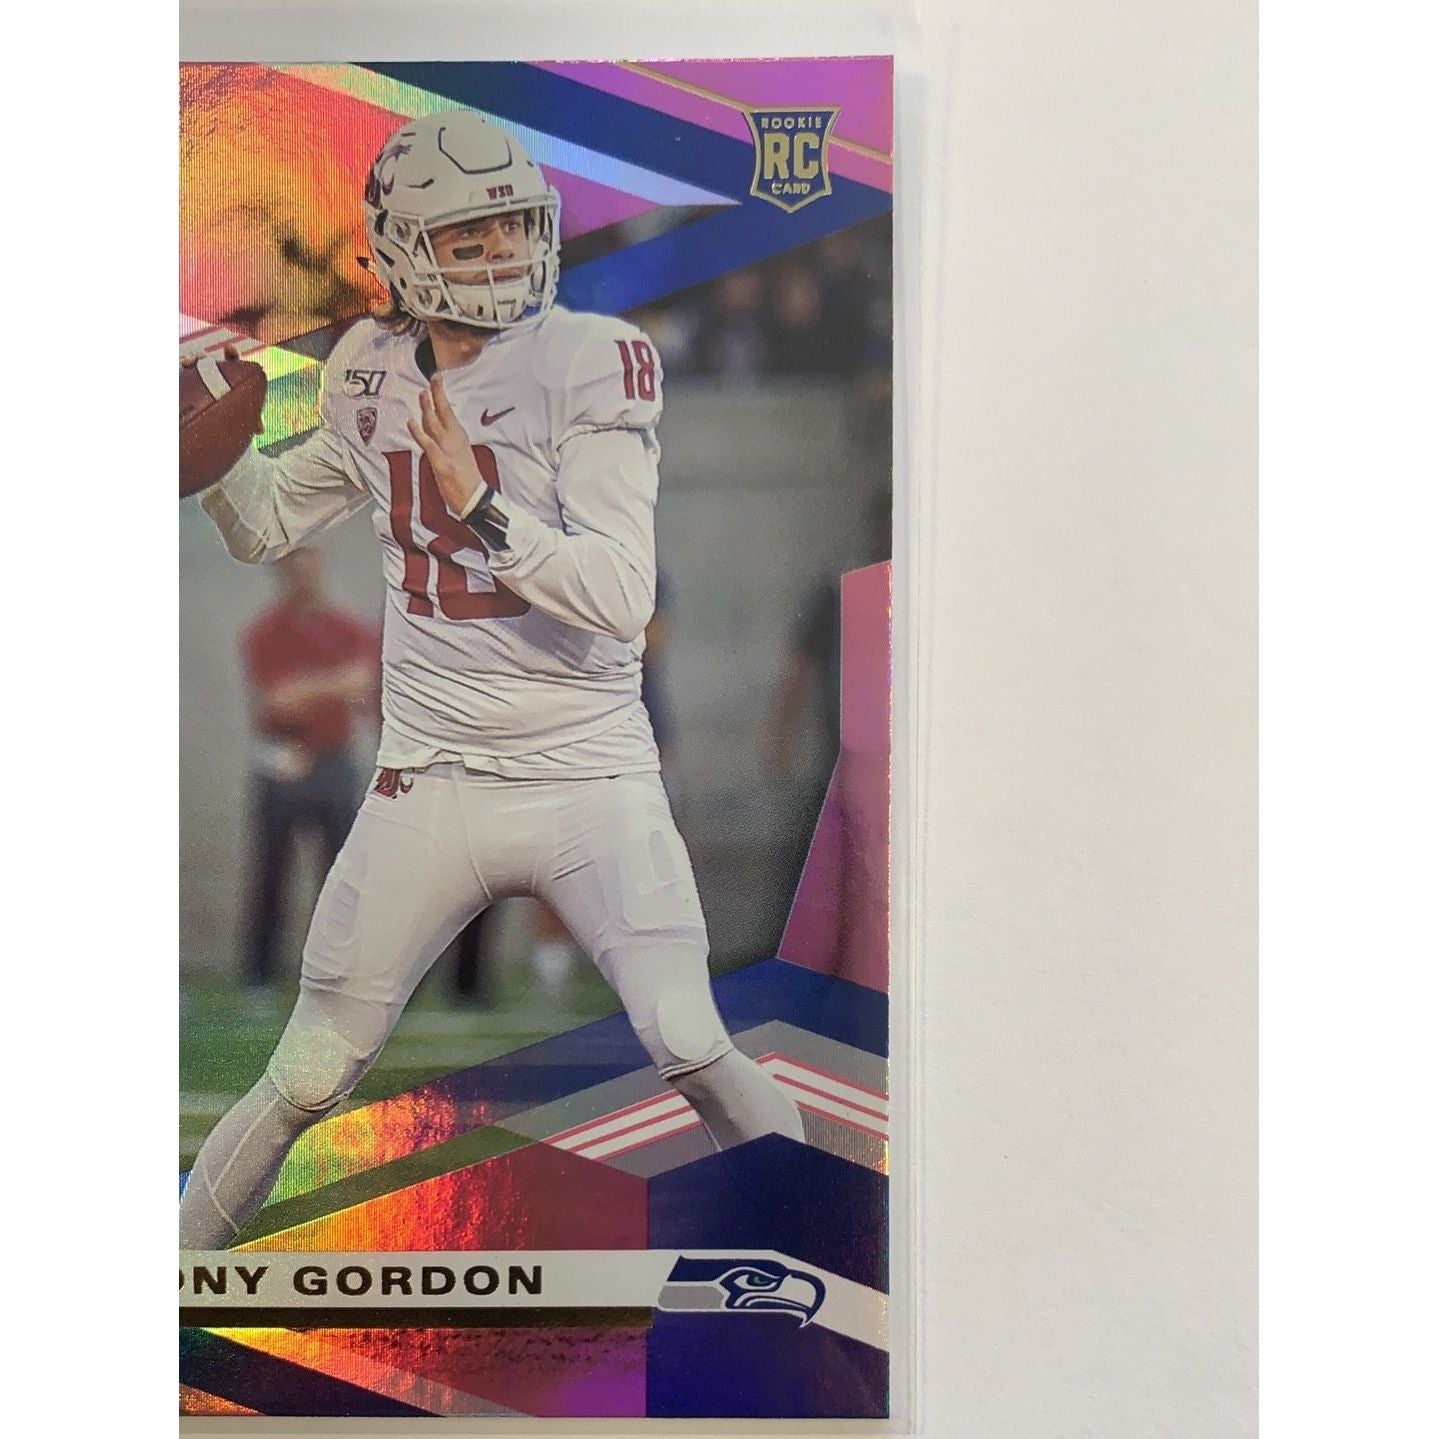  2020 Donruss Elite Anthony Gordon RC Pink Parallel  Local Legends Cards & Collectibles